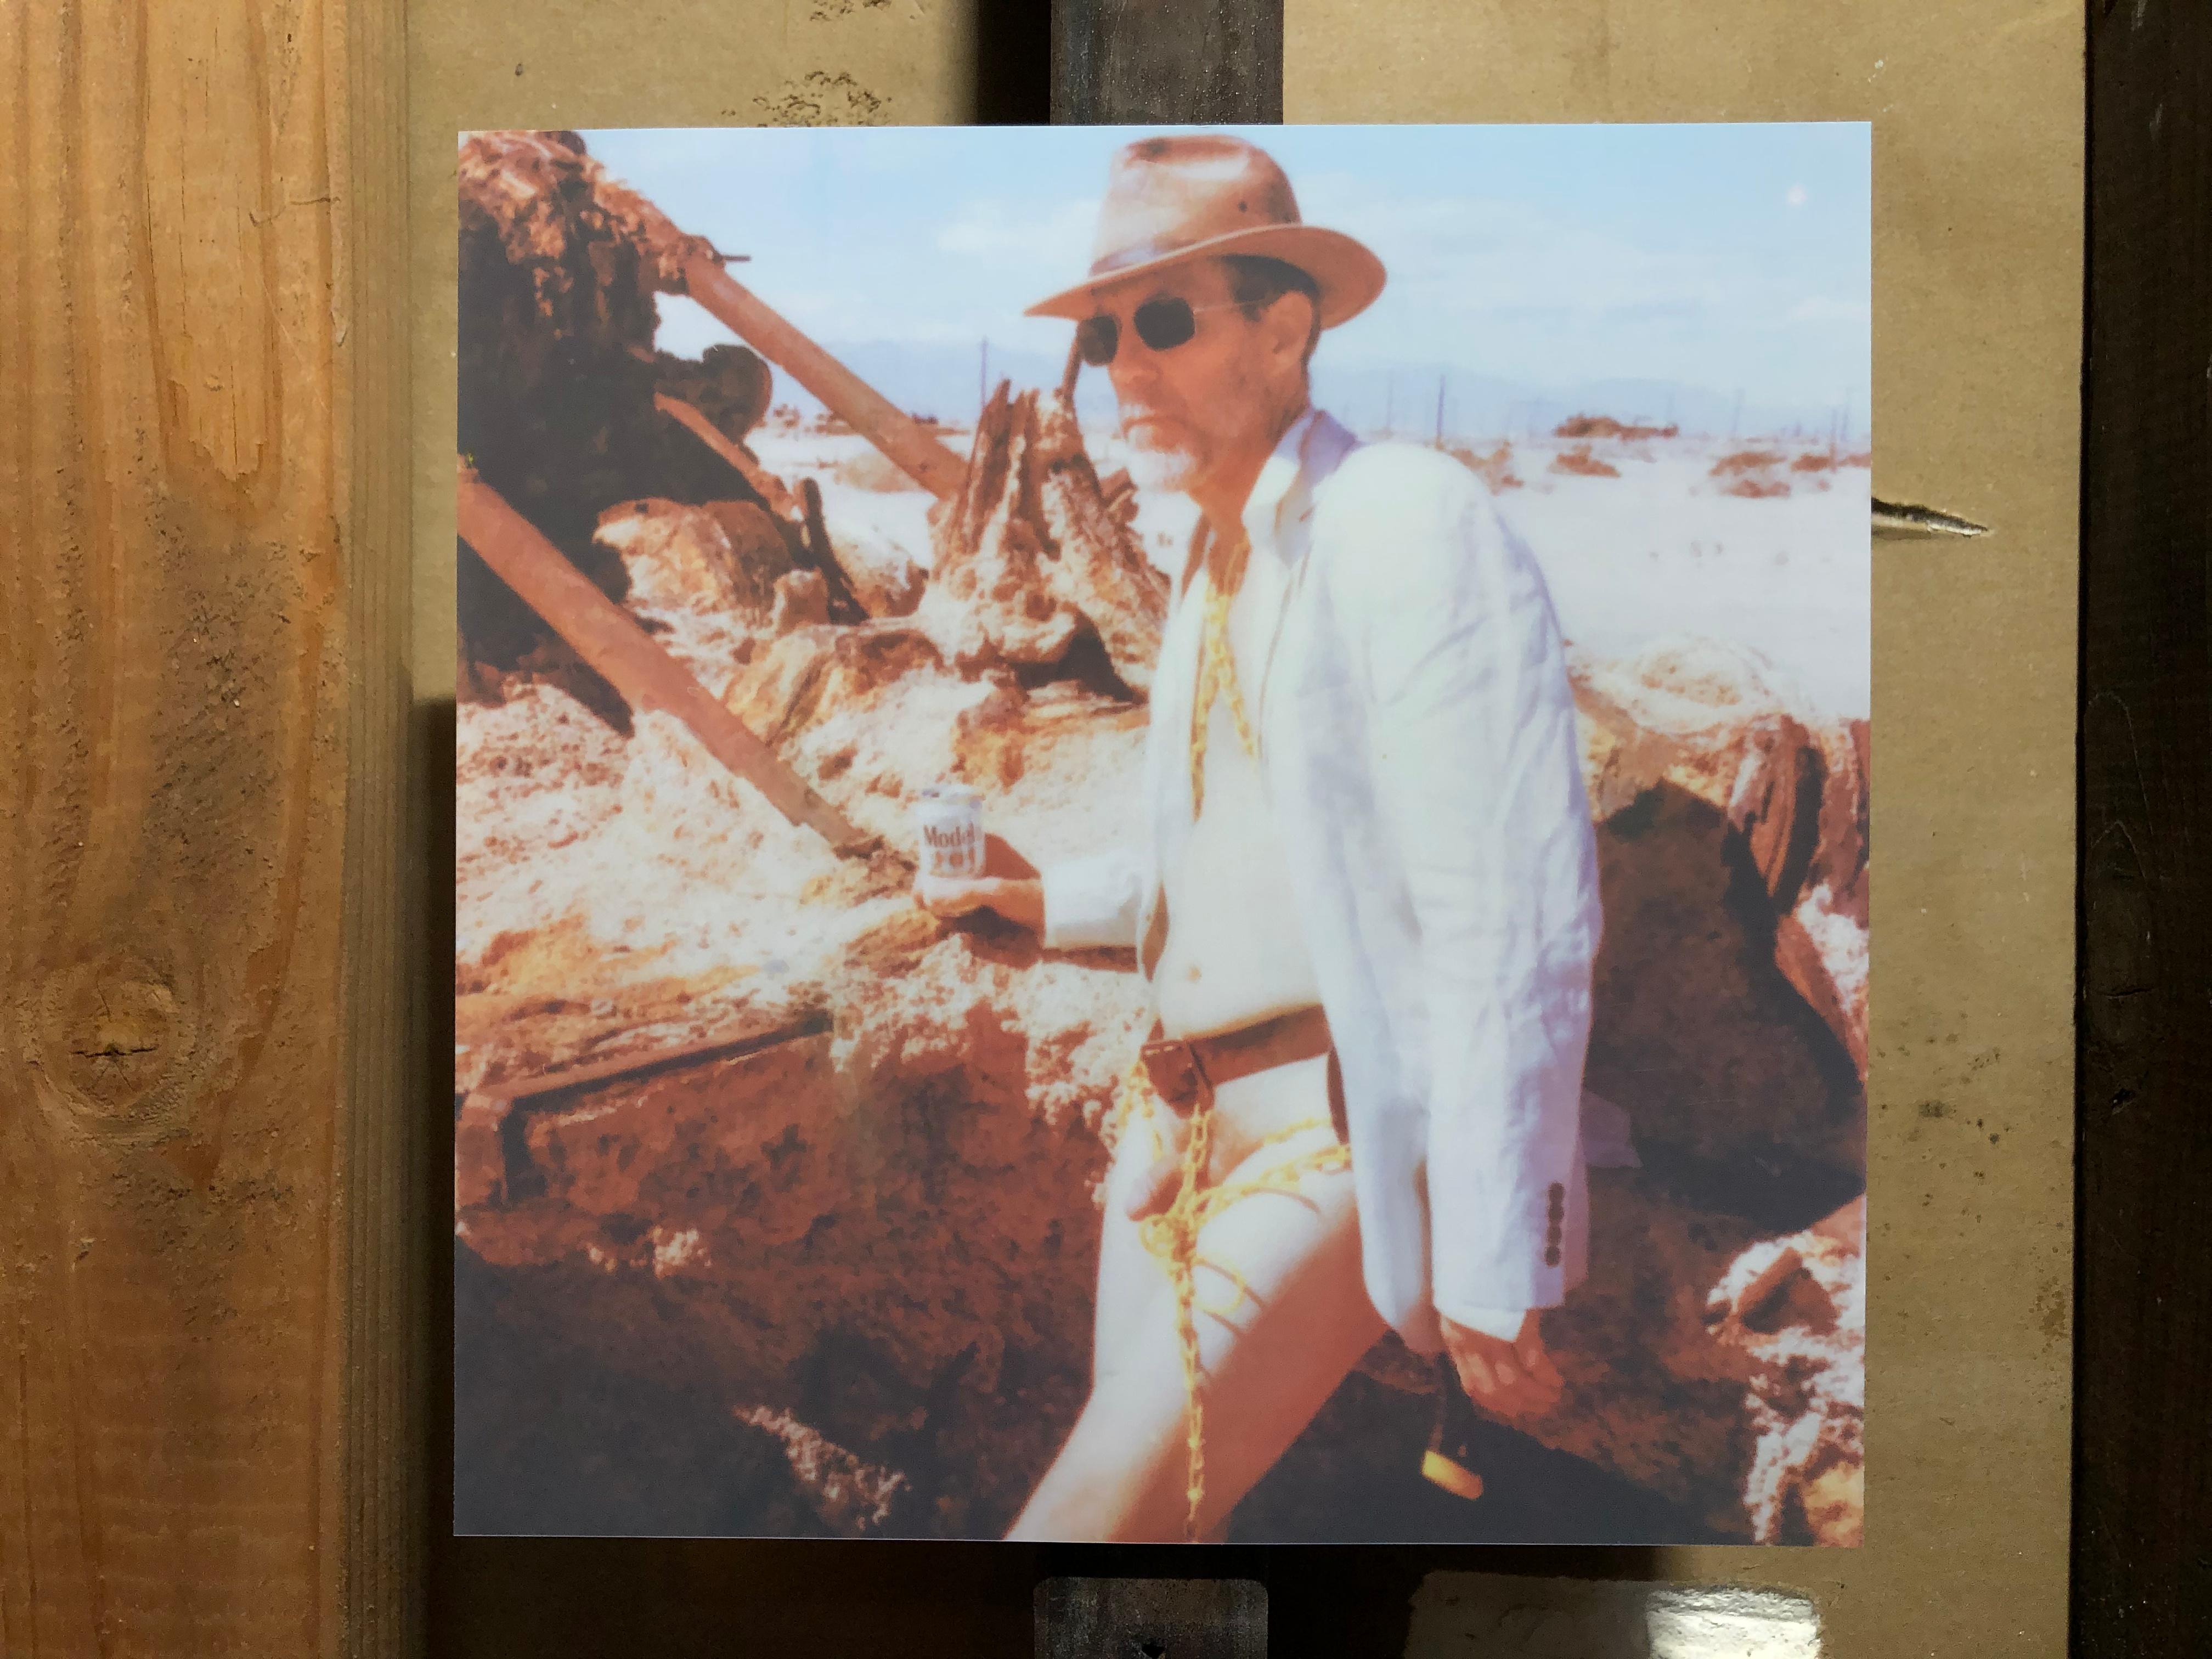 Memoirs of a Beach Boy -
part of the series The Crazy Adventures of David C. - 
2019

20x20cm, 
Edition of 7 plus 2 Artist Proofs. 
Archival C-Print based on the original Polaroid. 
Signature label with certificate. 
Artist inventory PL2019-526.
Not